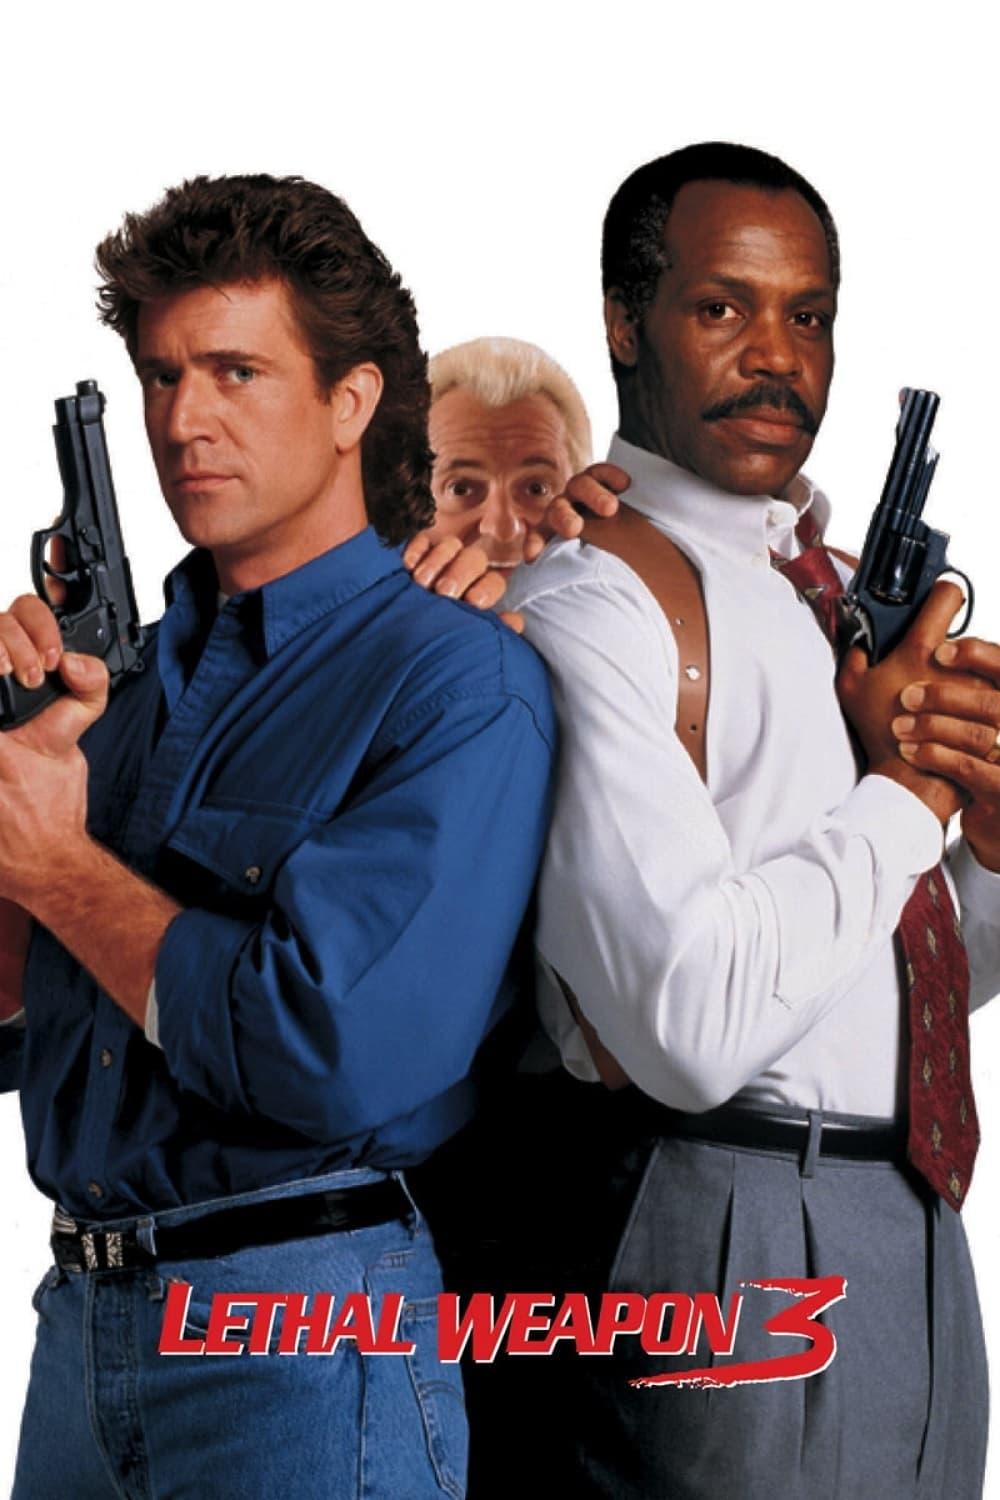 Lethal Weapon 3 poster